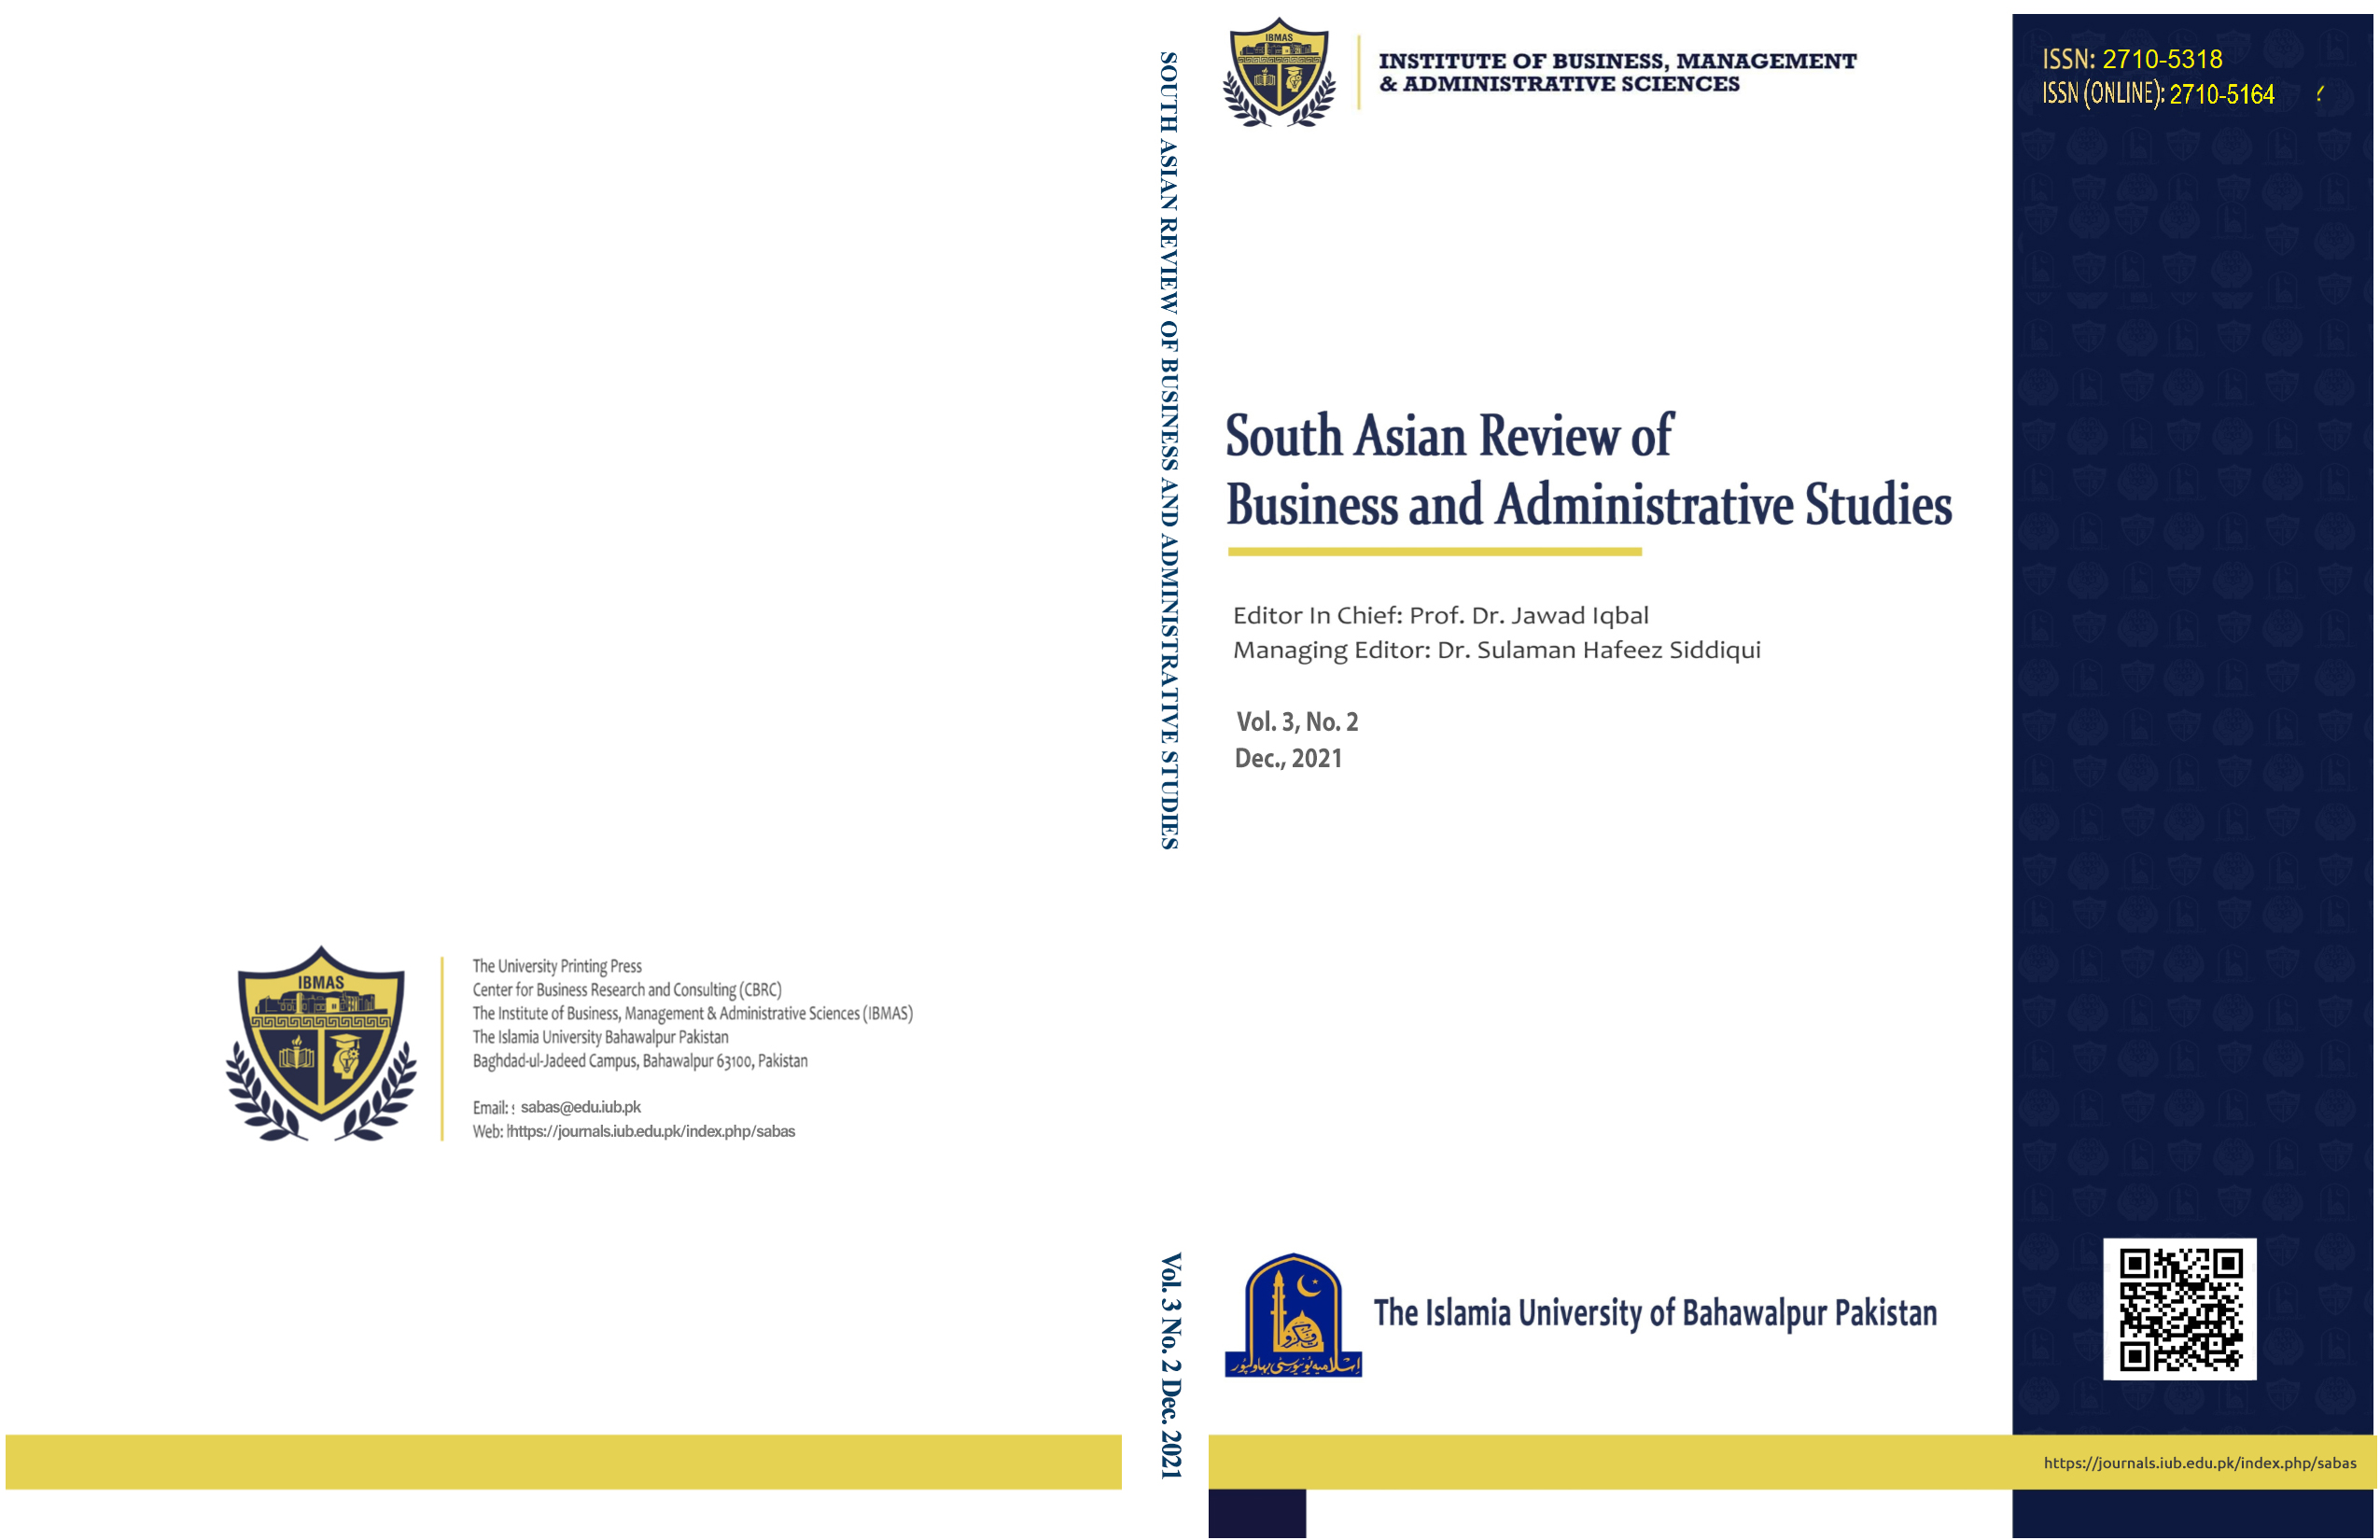 South Asian Journal of Business and Administrative Studies